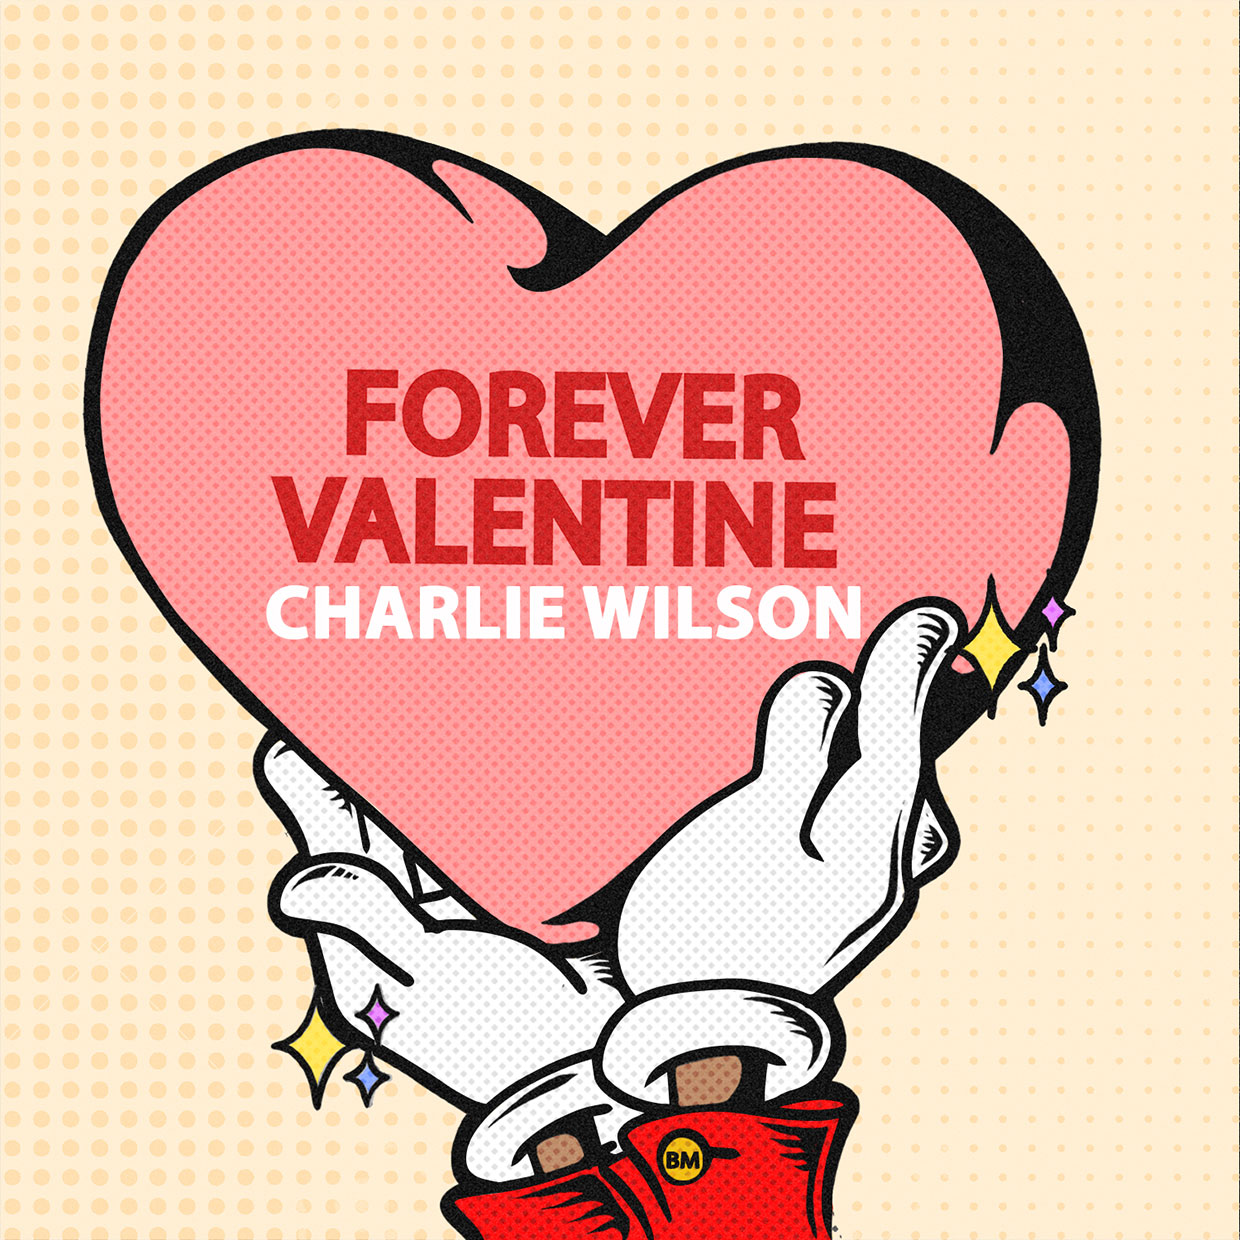 Charlie Wilson Celebrates Love of All Ages in "Forever Valentine" Video